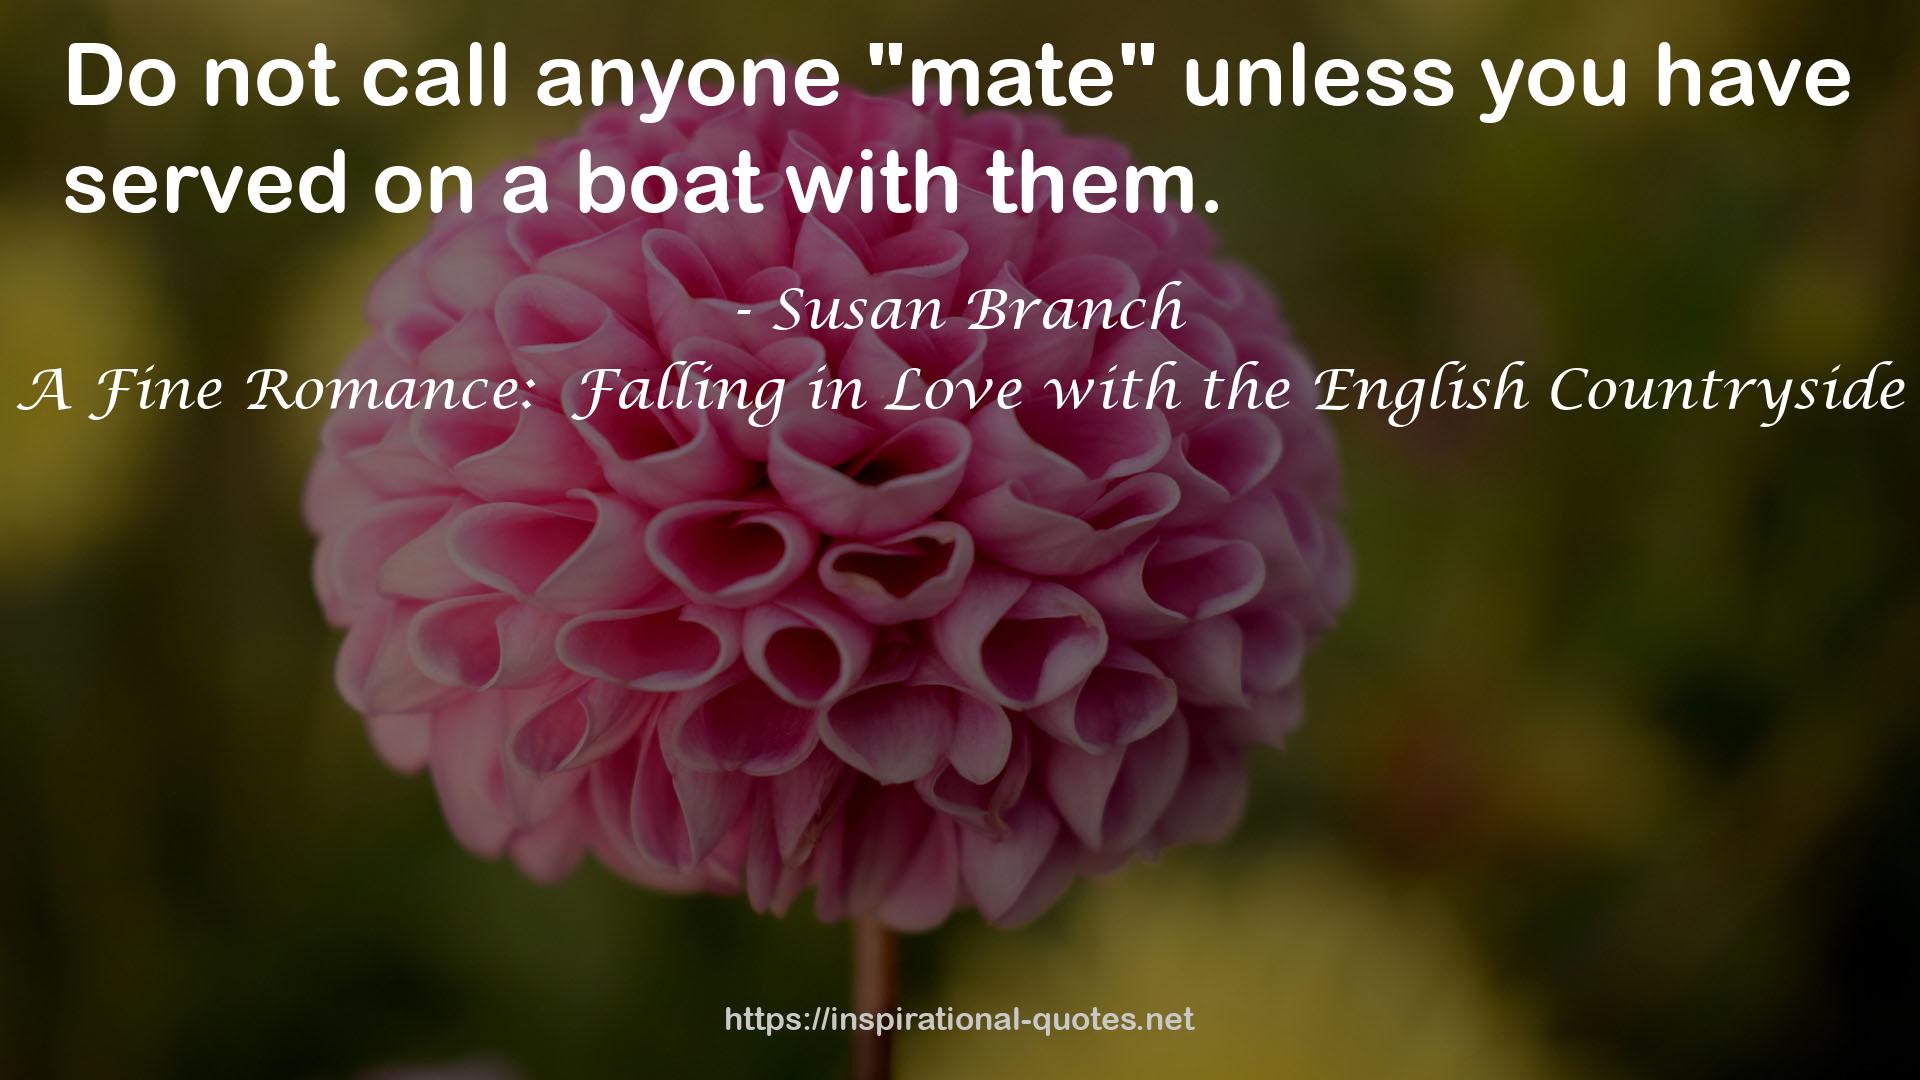 A Fine Romance:  Falling in Love with the English Countryside QUOTES